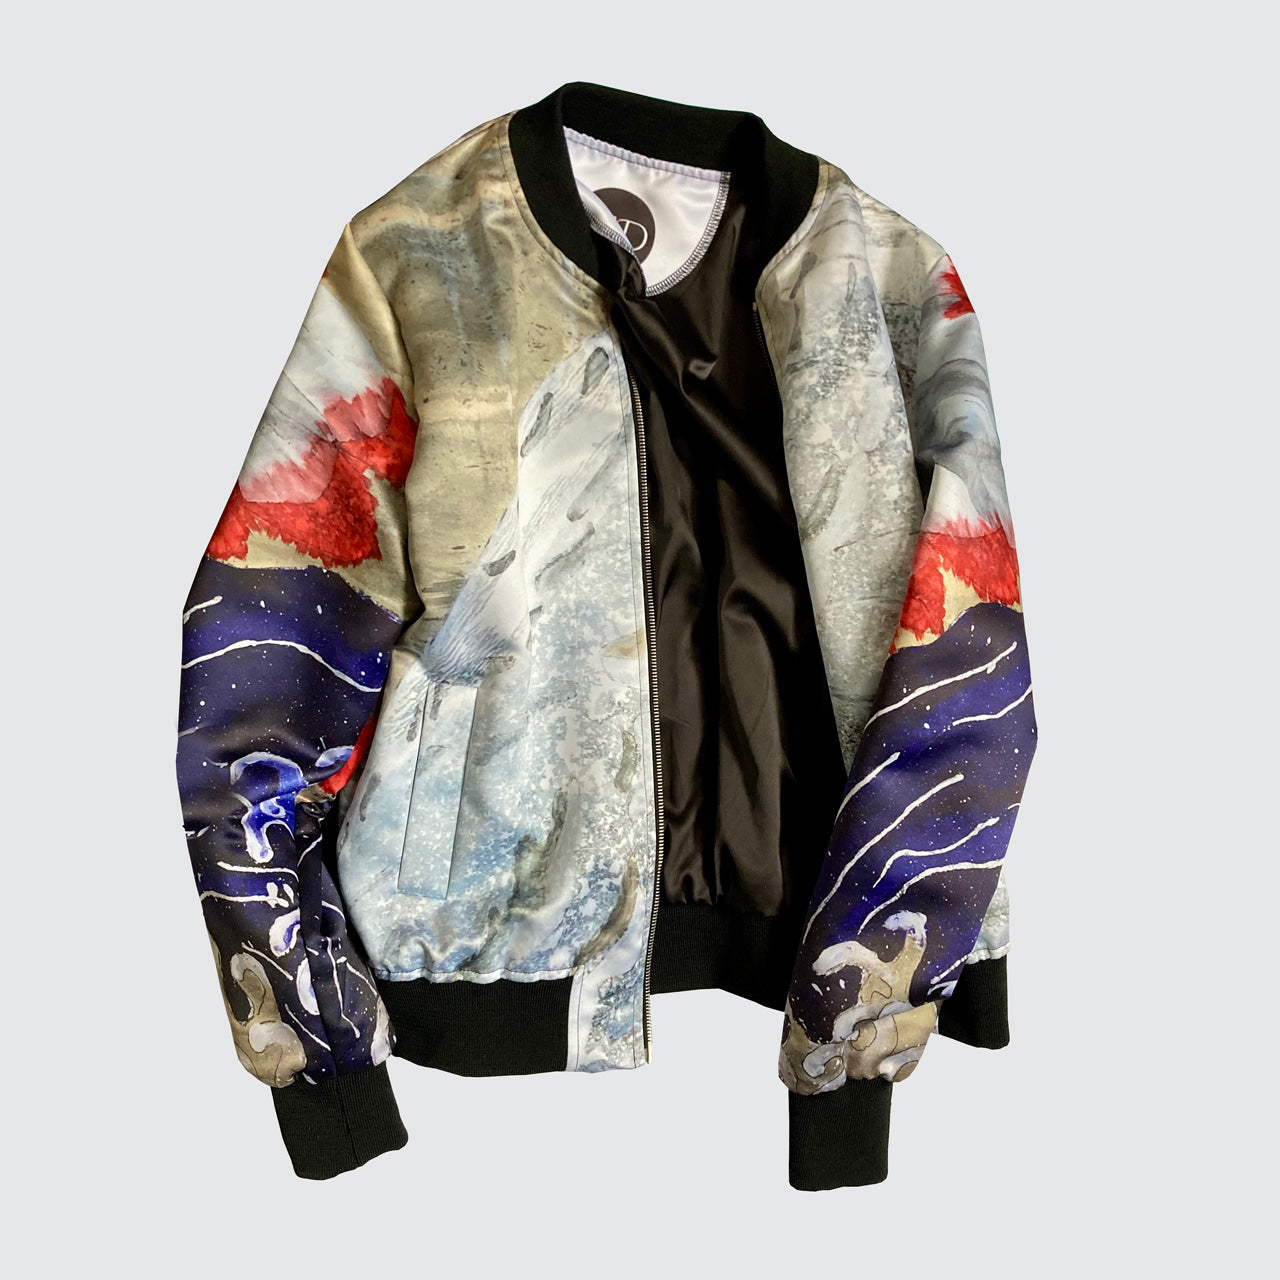 Unisex AOP Bomber Jacket With Samurai Art Design at Rs 1299.00 | Bomber  Jackets | ID: 2852535135412